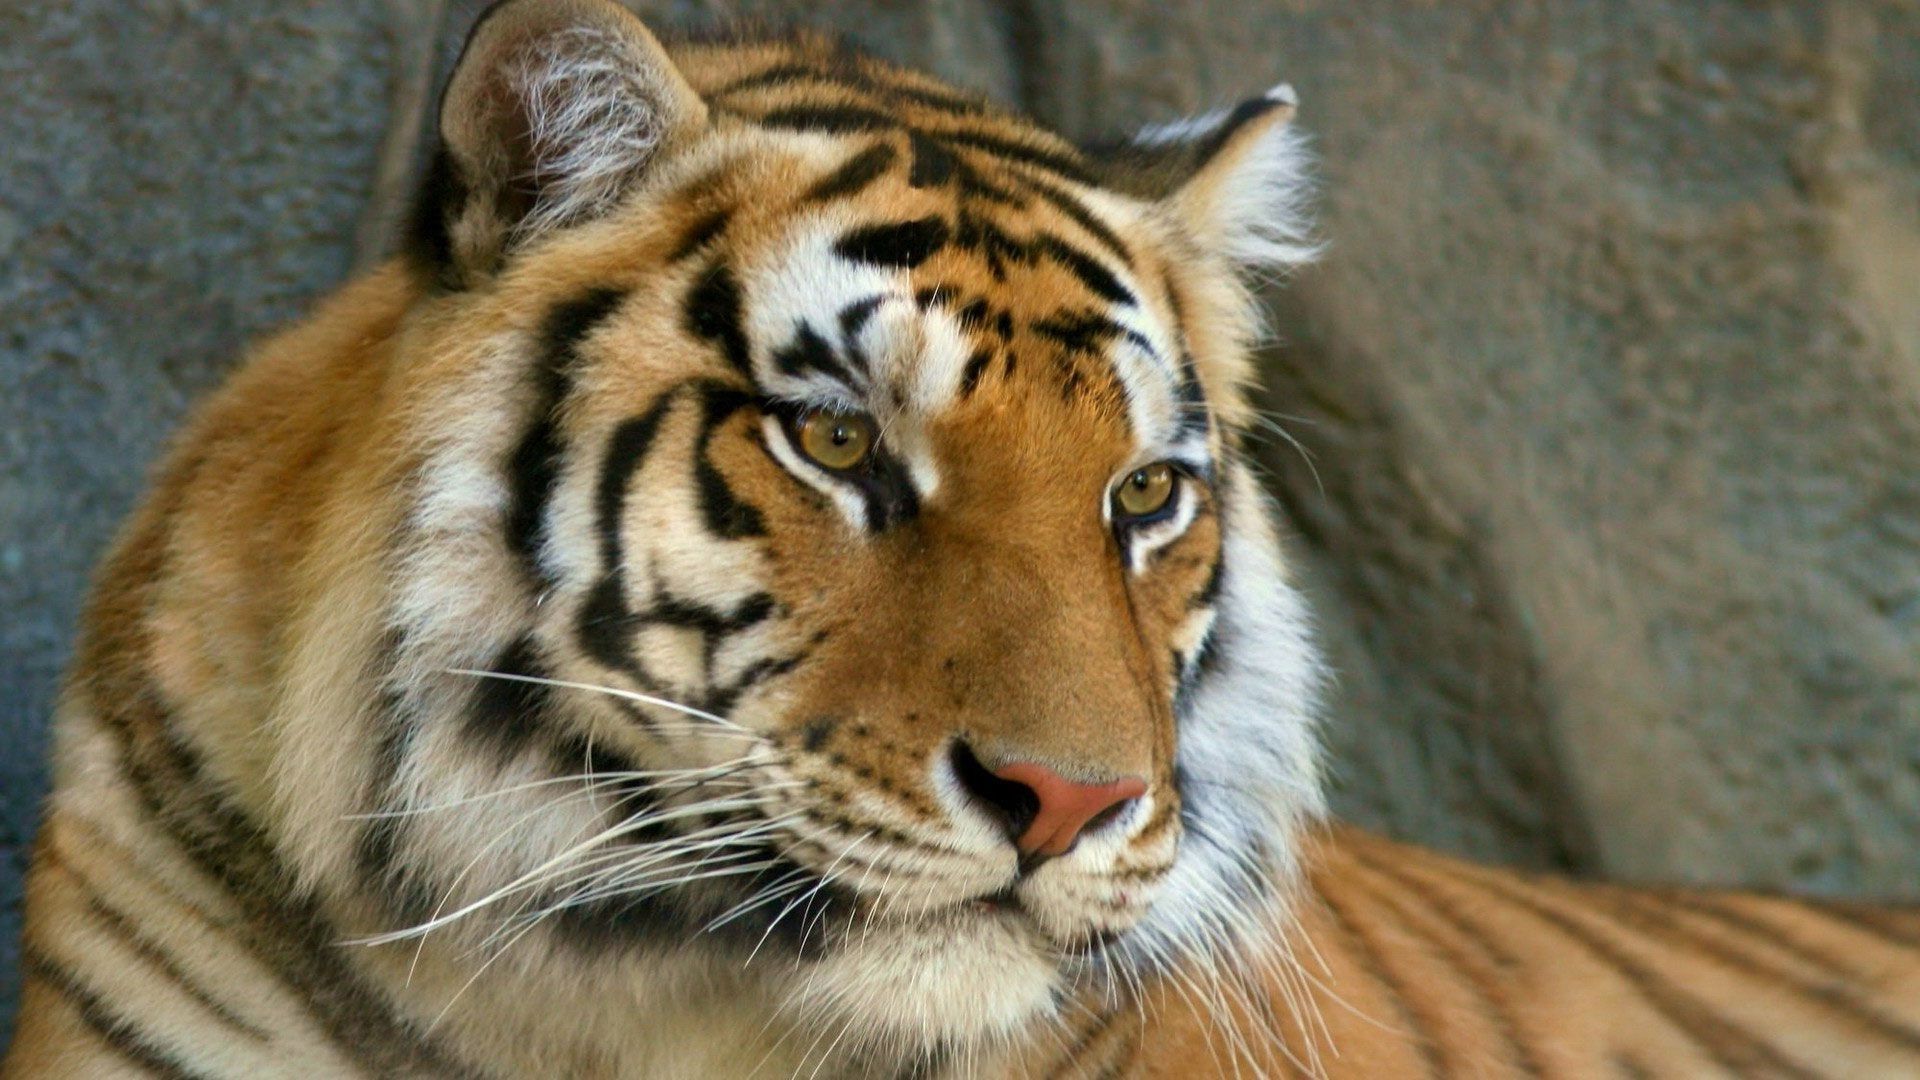 Top 1920x1080 Tiger Face Stone Images for Pinterest